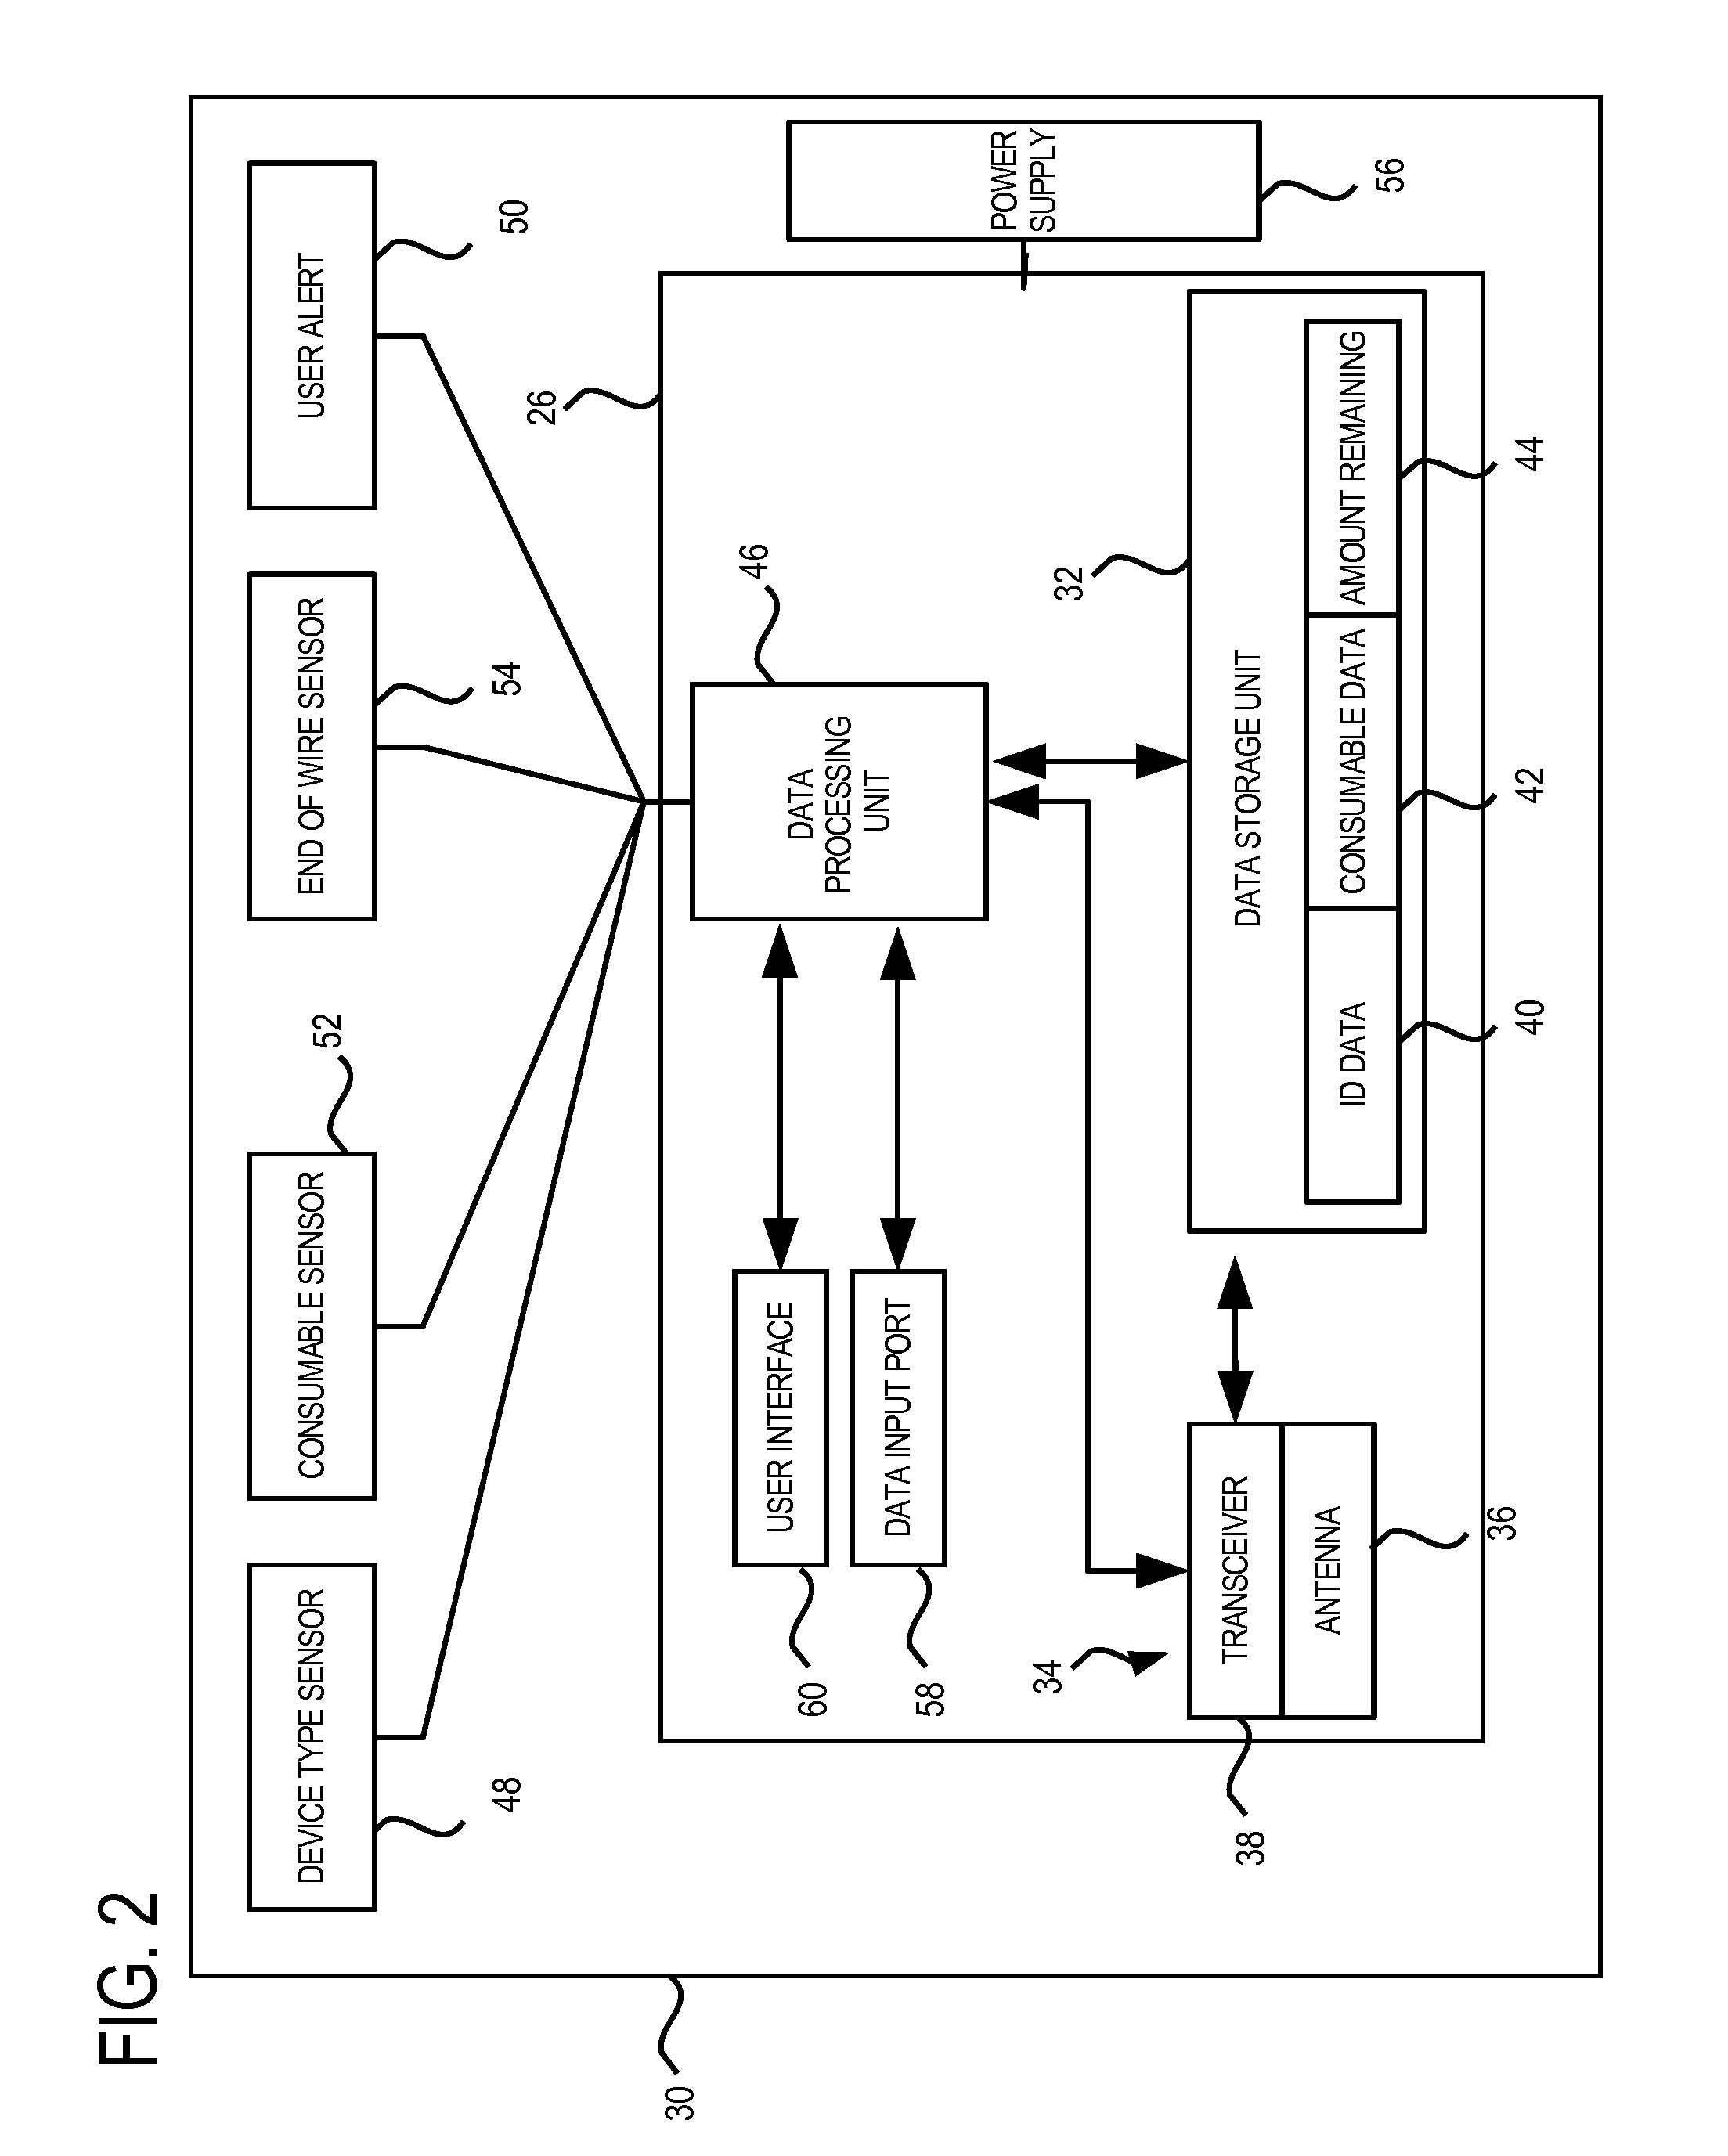 Wireless system control and inventory monitoring for welding-type devices